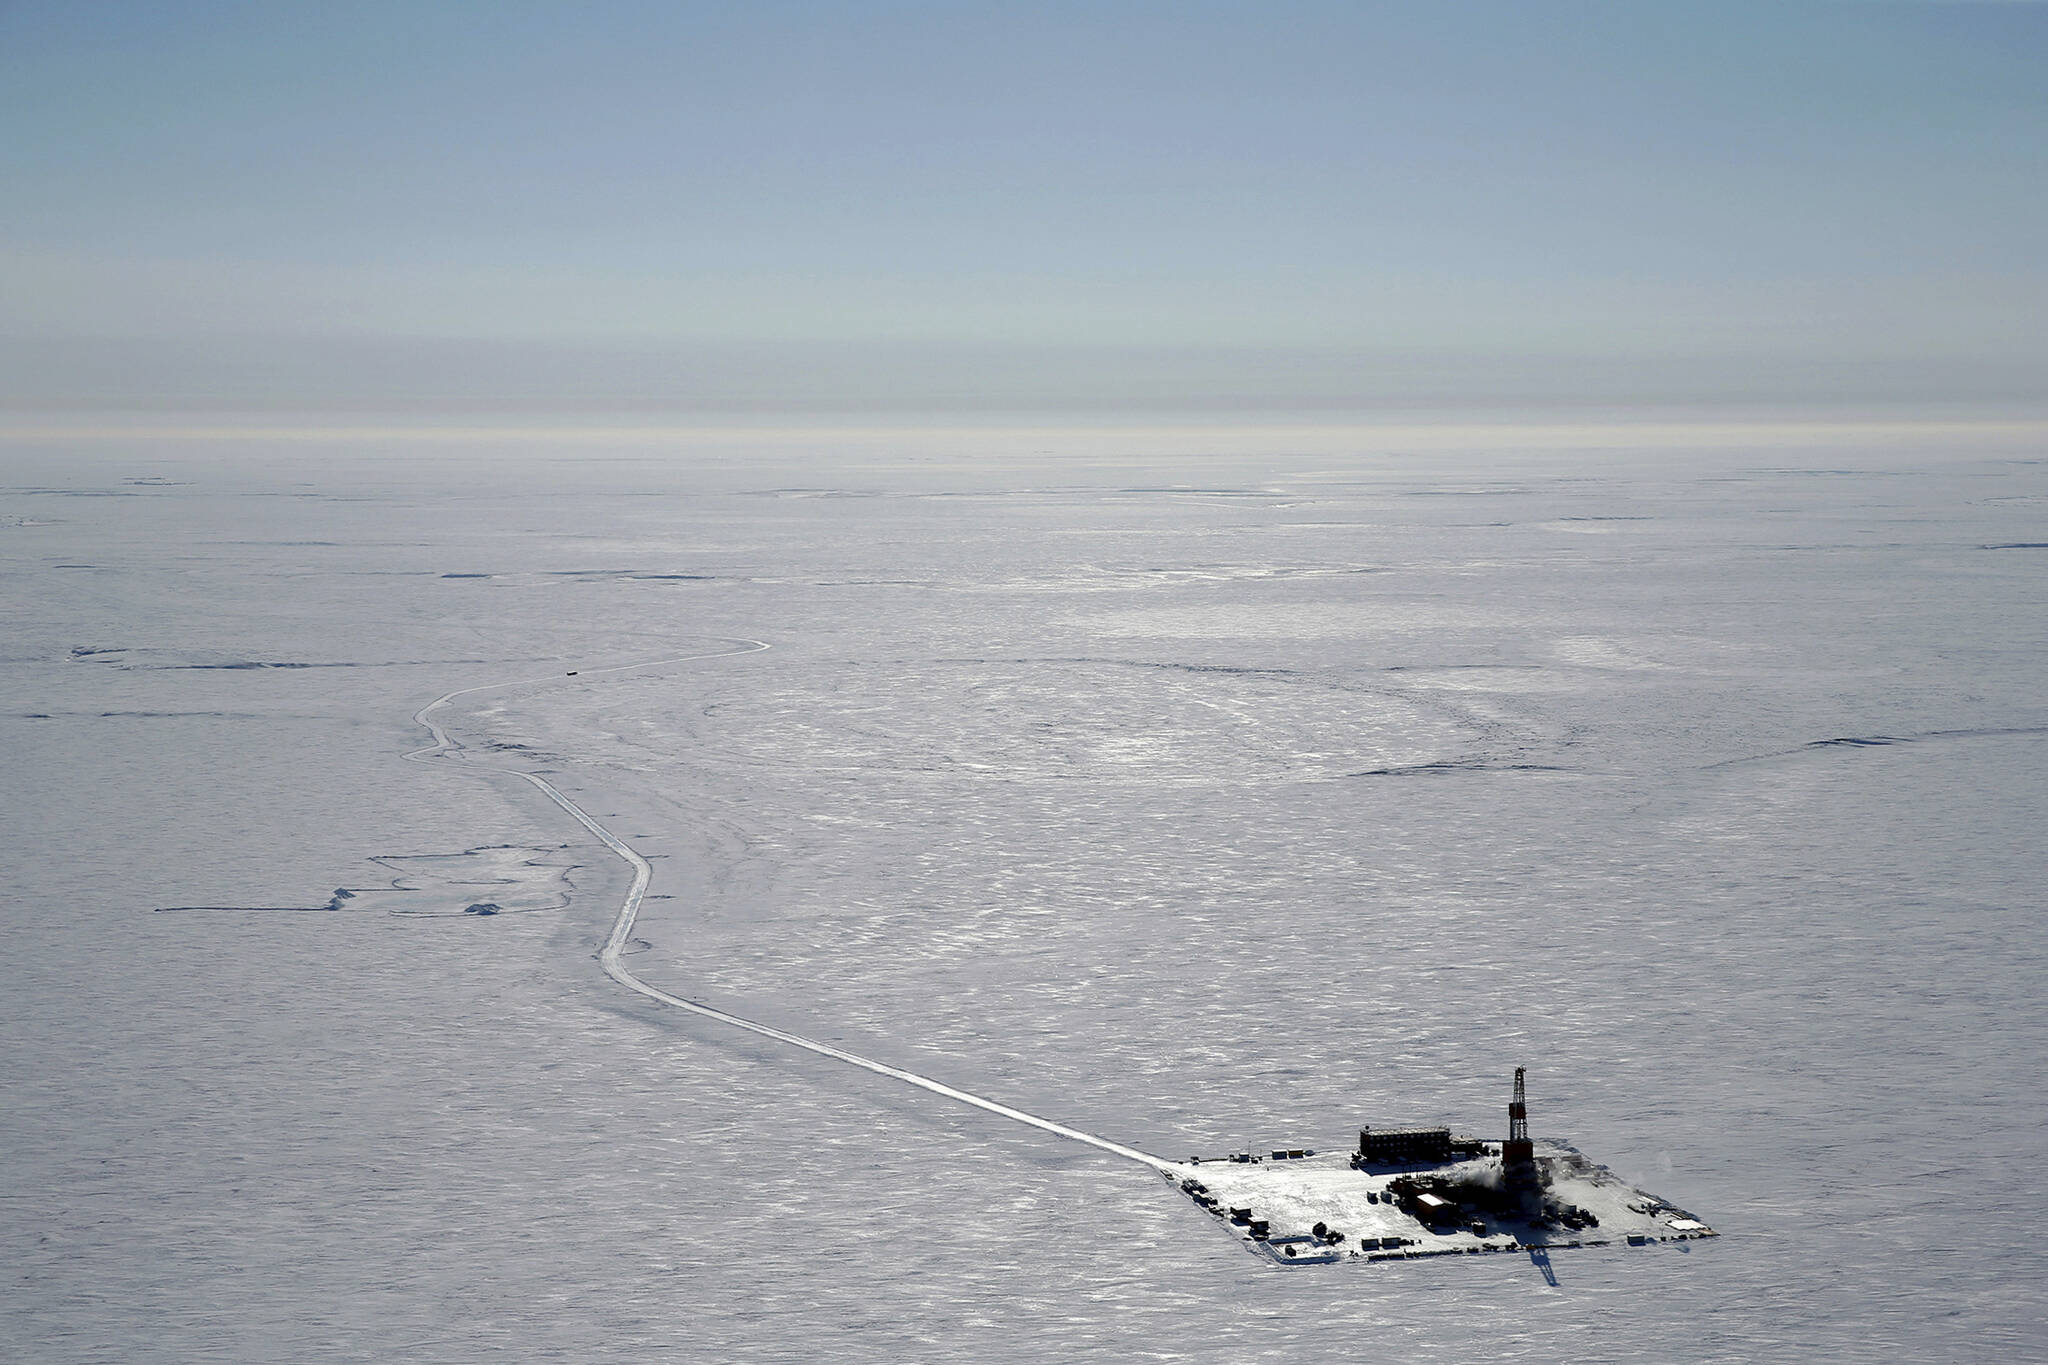 This 2019 aerial photo provided by ConocoPhillips shows an exploratory drilling camp at the proposed site of the Willow oil project on Alaska’s North Slope. The Biden administration is weighing approval of a major oil project on Alaska’s petroleum-rich North Slope that supporters say represents an economic lifeline for Indigenous communities in the region but environmentalists say is counter to Biden’s climate goals. A decision on ConocoPhillips Alaska’s Willow project, in a federal oil reserve roughly the size of Indiana, could come by early March 2023. (ConocoPhillips)